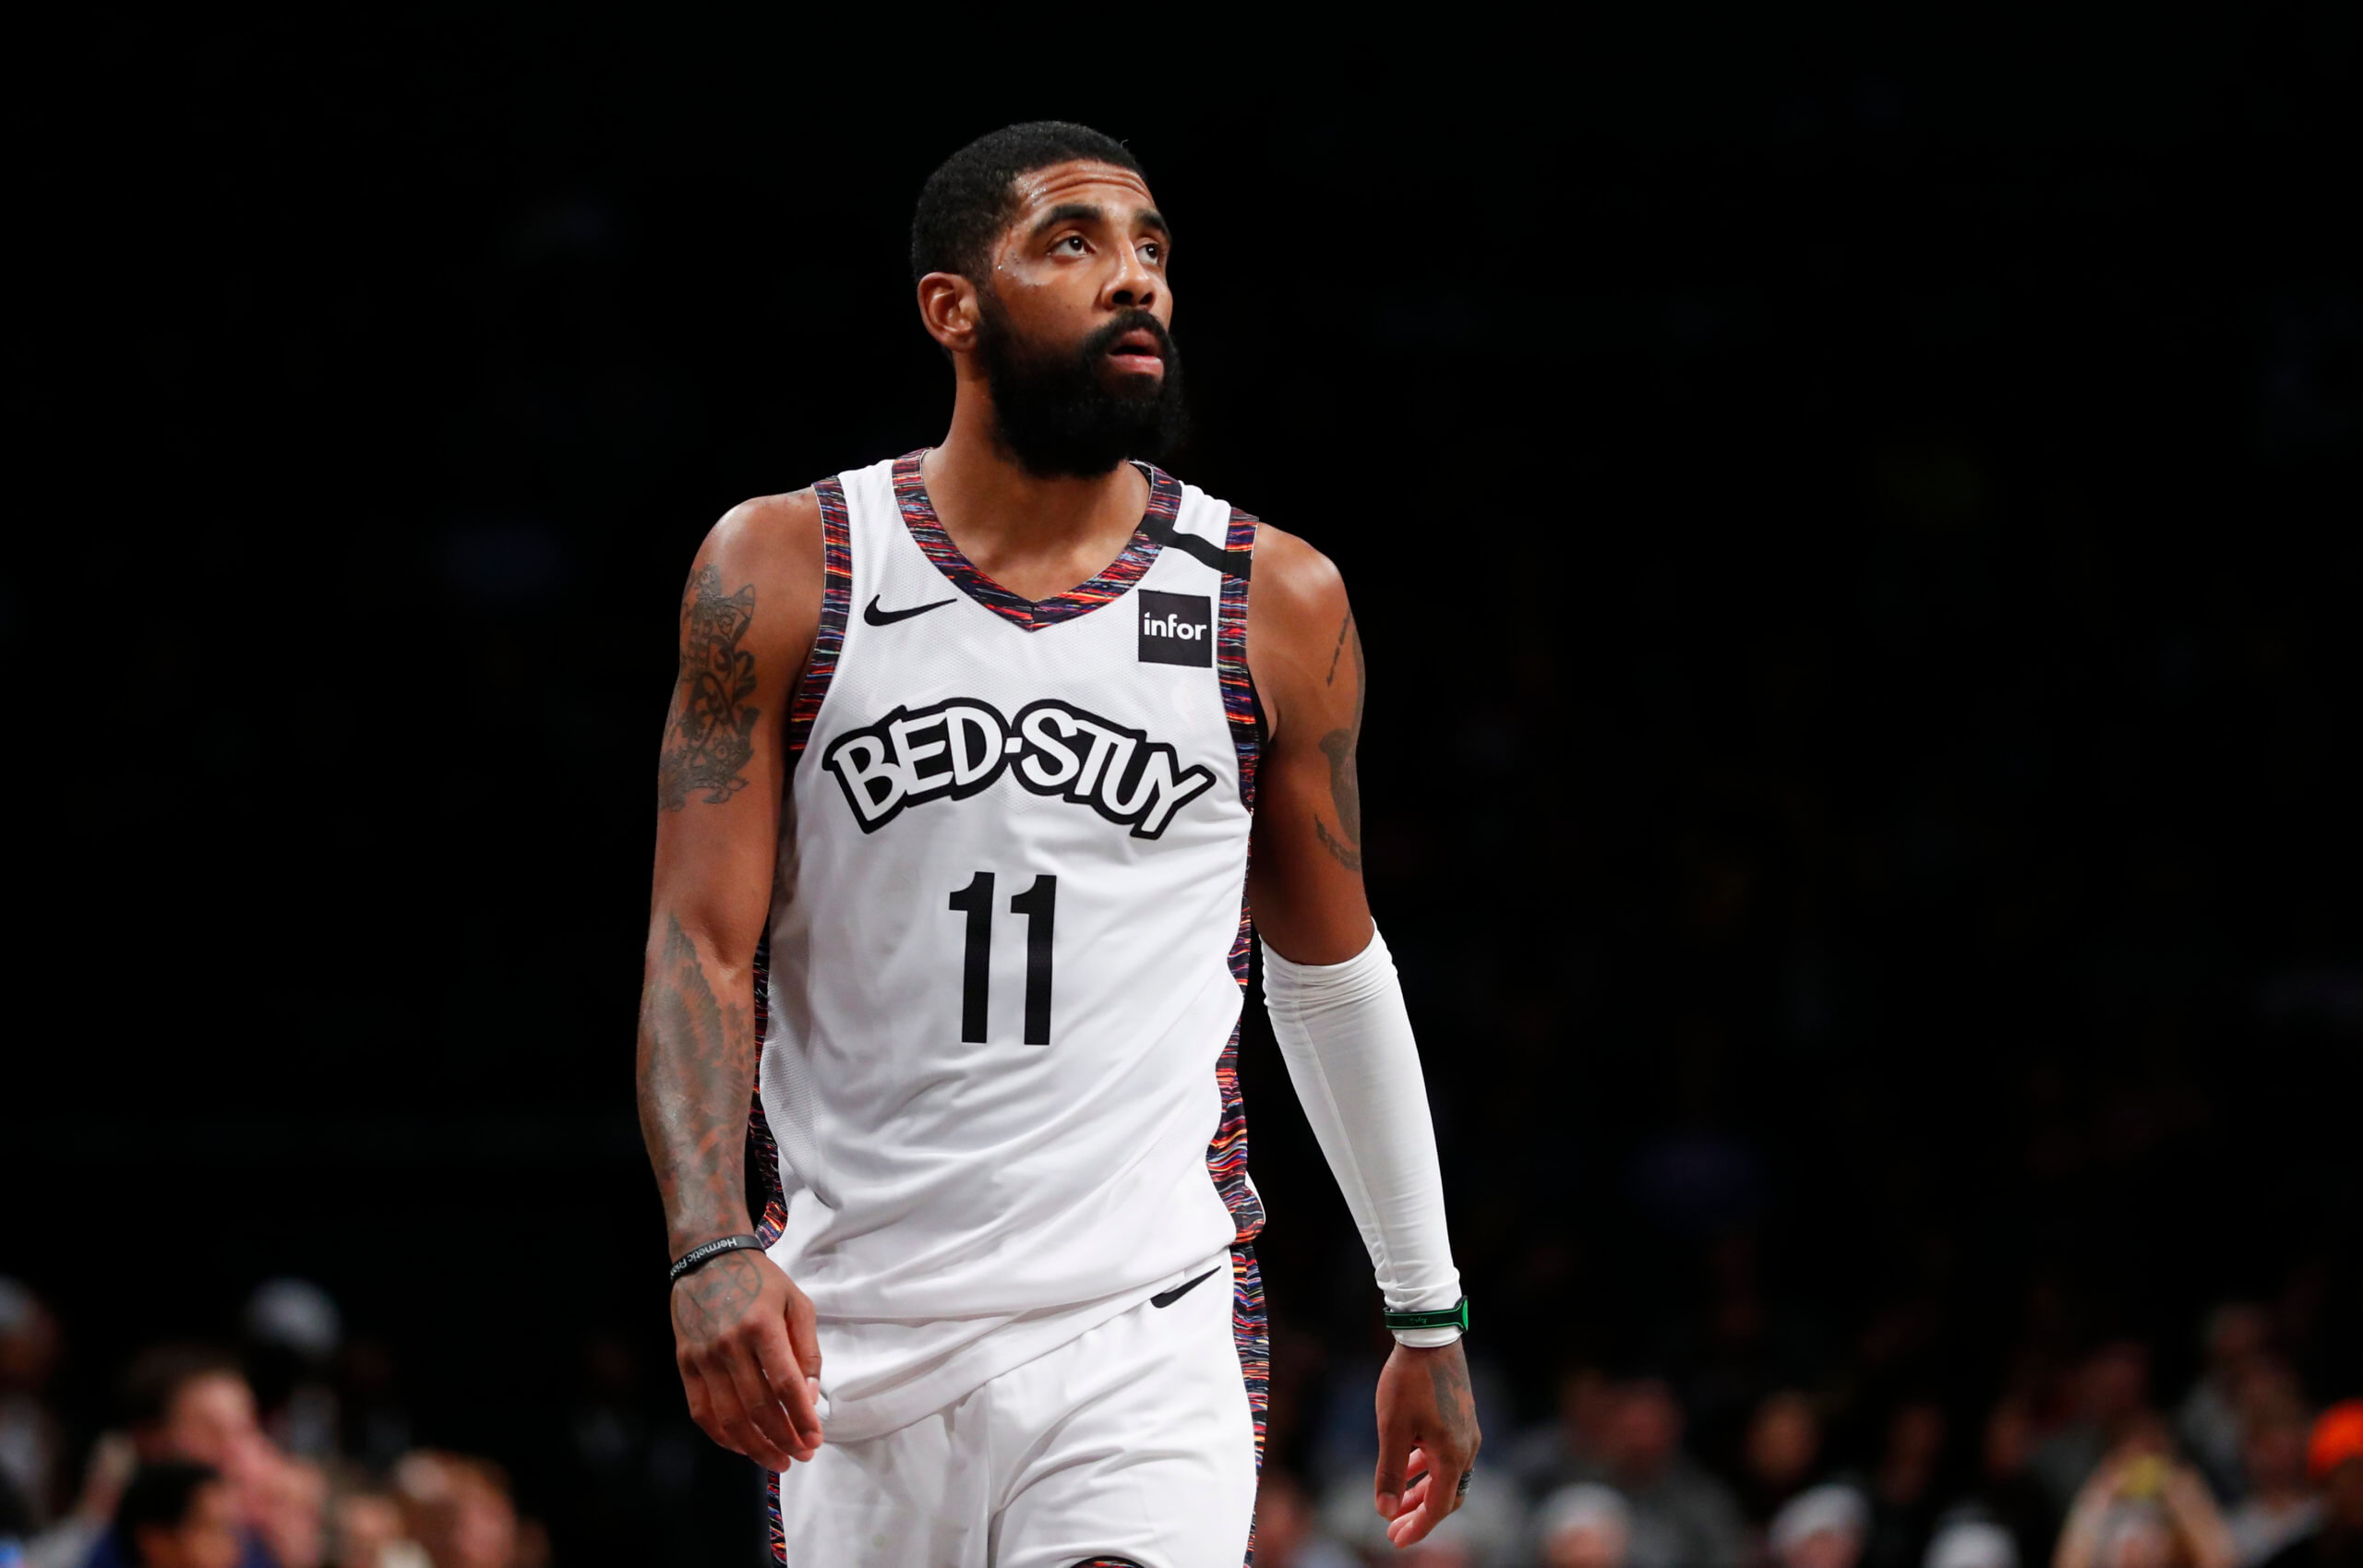 Brooklyn Nets star Kyrie Irving won't play due to unvaccinated